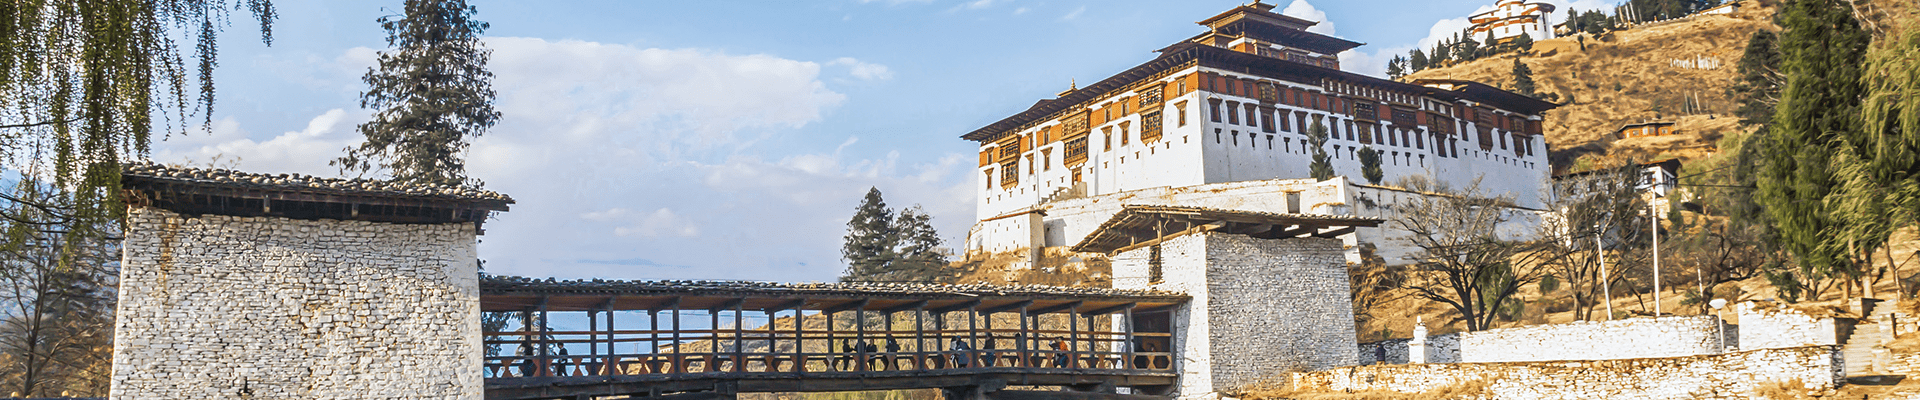 We arrange best places to stay in Bhutan for you